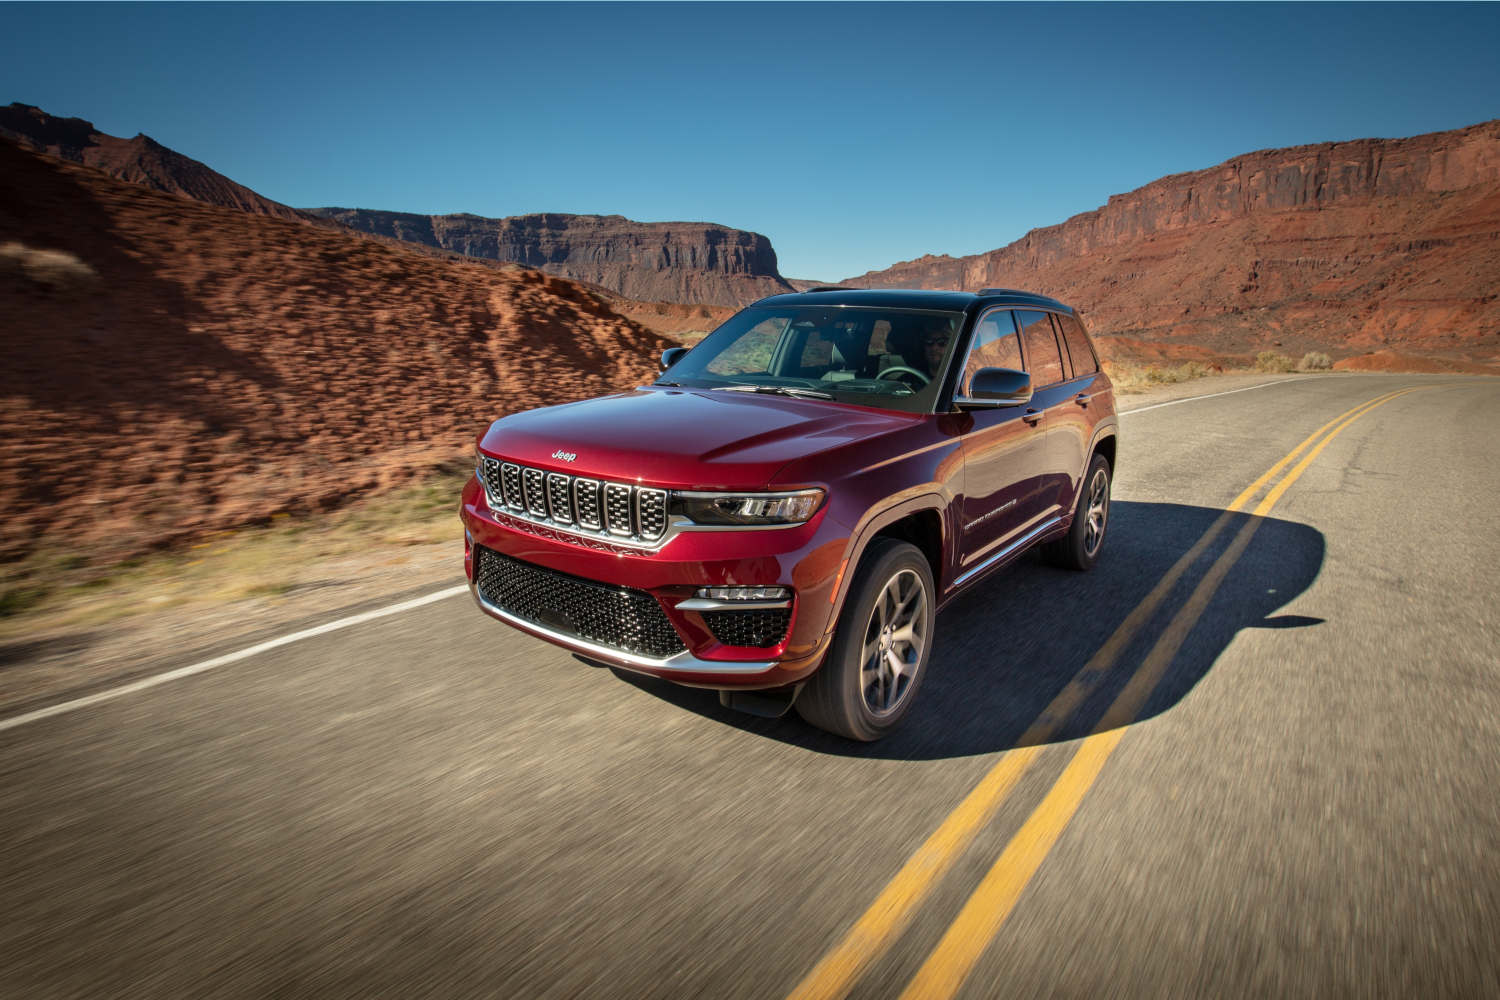 Reliable midsize SUVs like this Jeep Grand Cherokee are popular